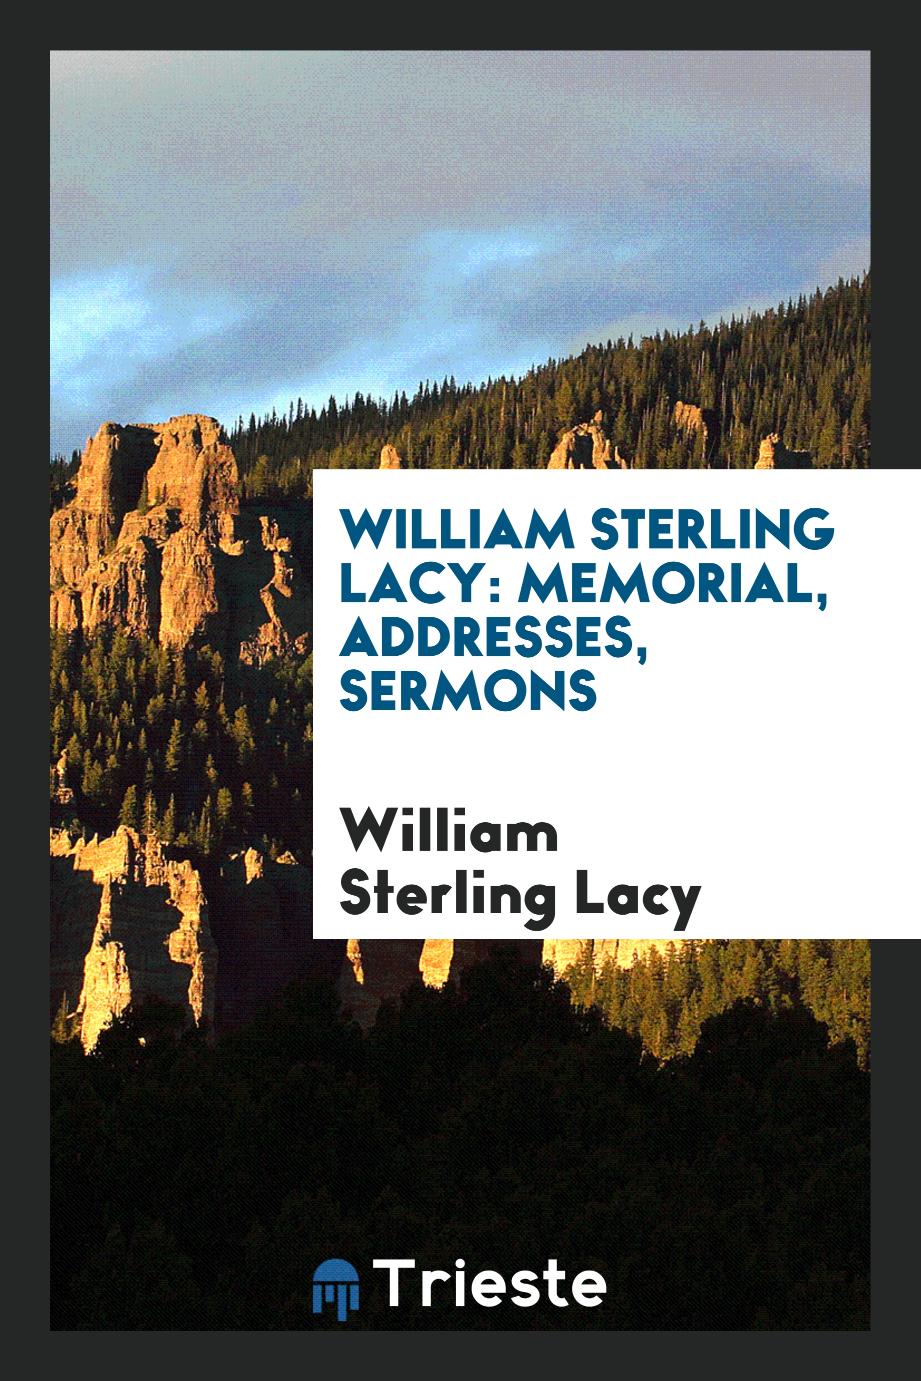 William Sterling Lacy: memorial, addresses, sermons